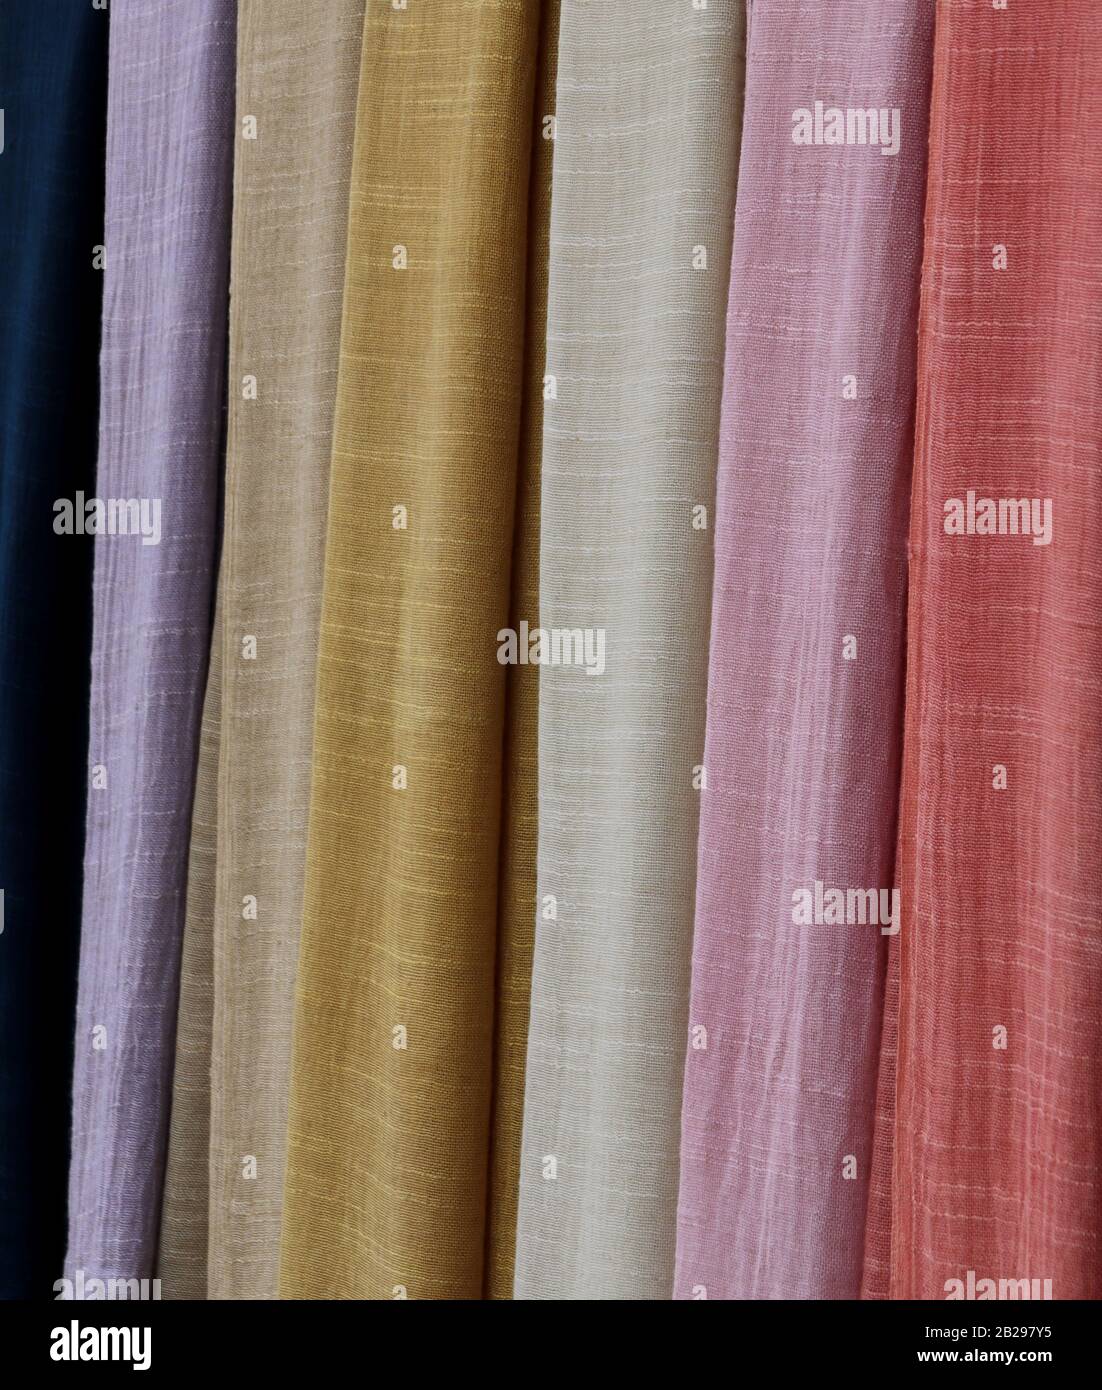 Natural dyed linen fabric Stock Photo